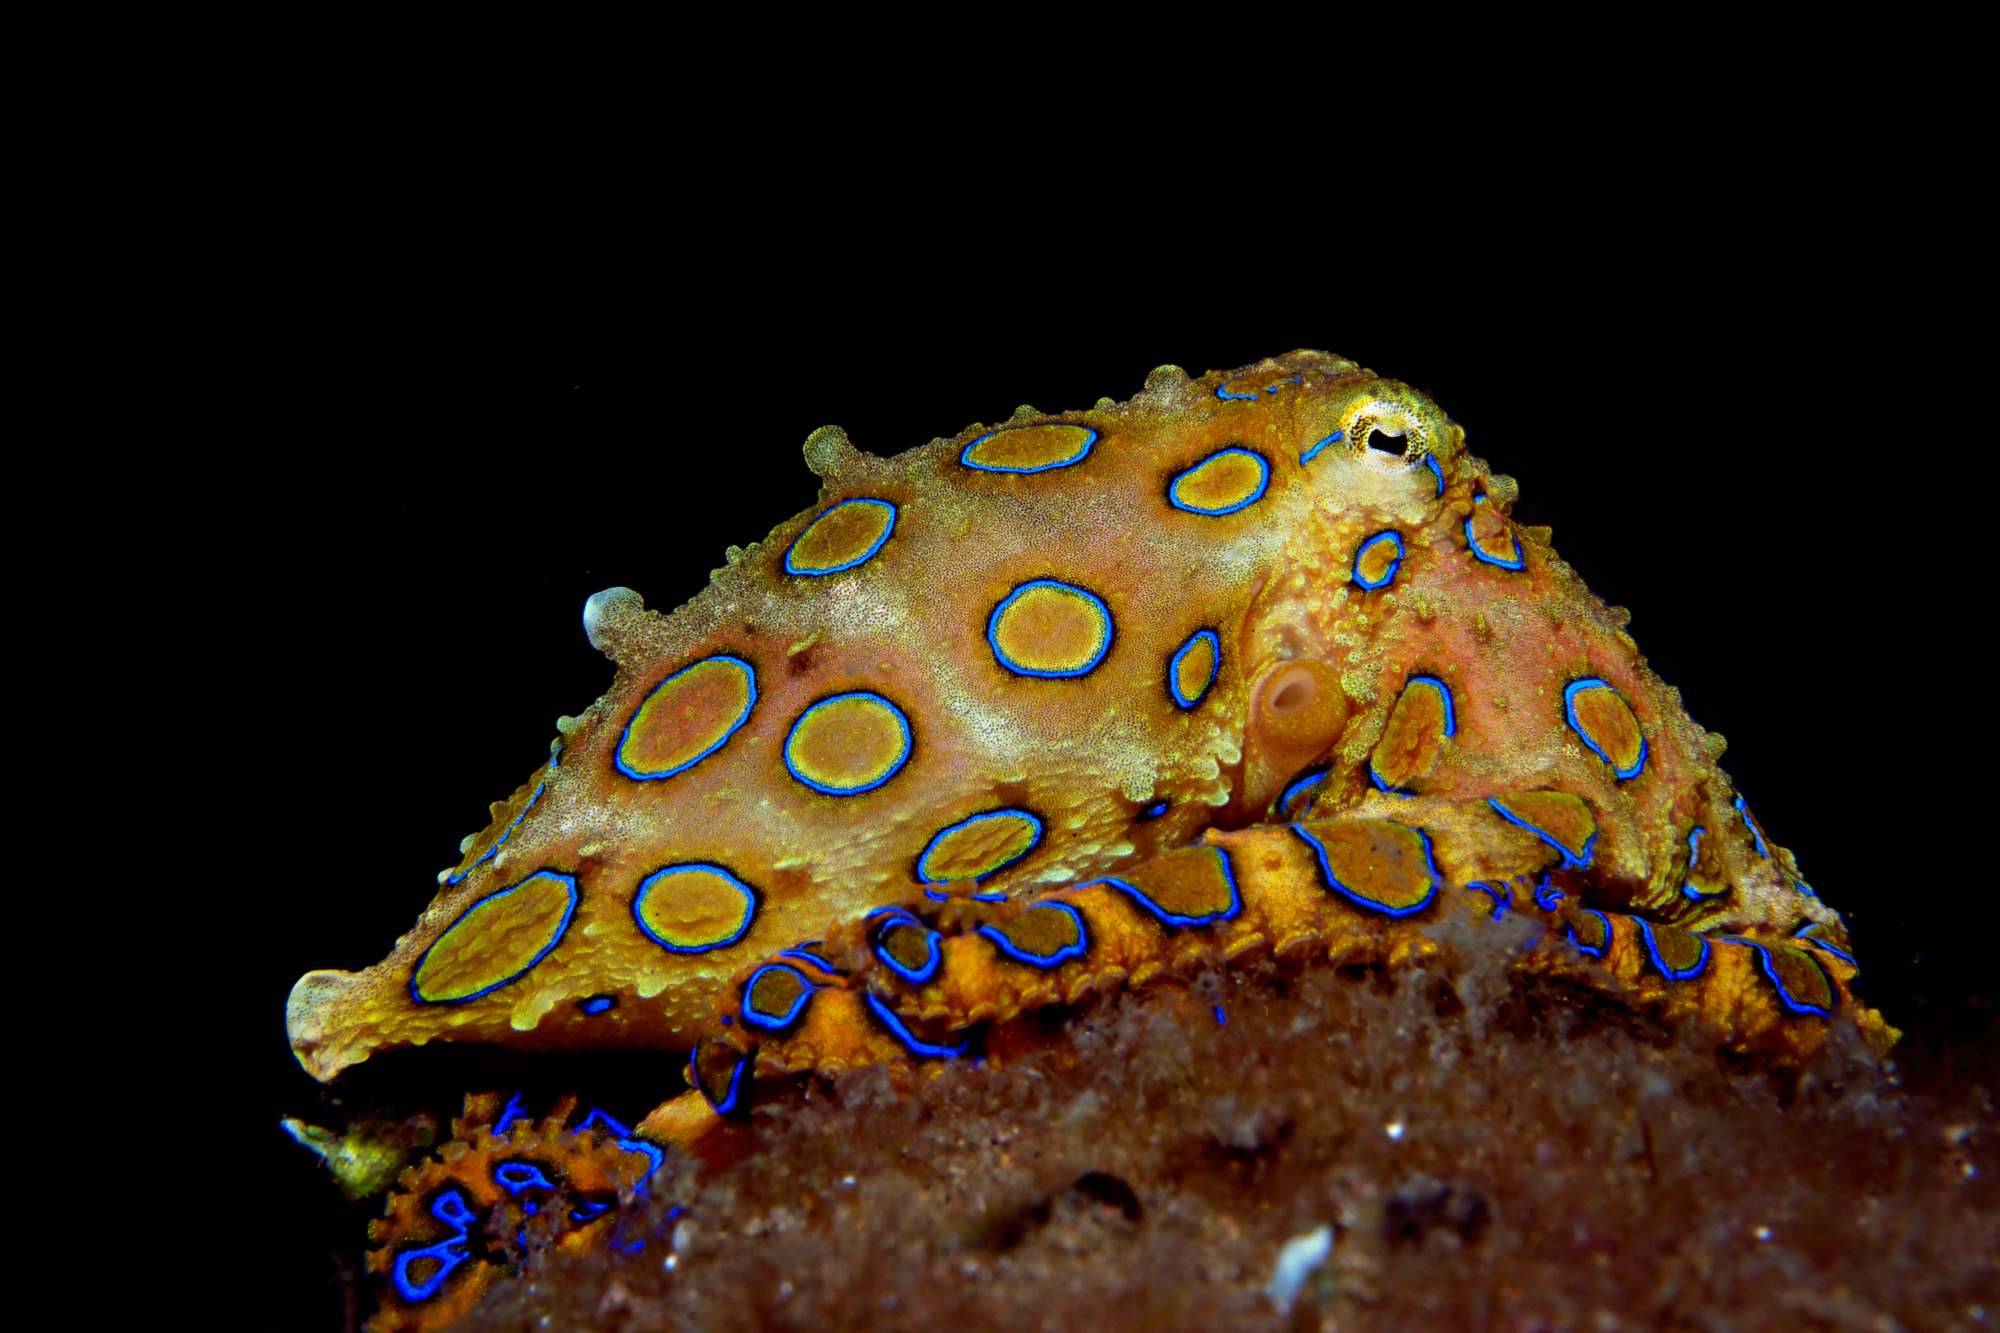 A photo of a blue-ringed octopus showing its iridescent blue rings